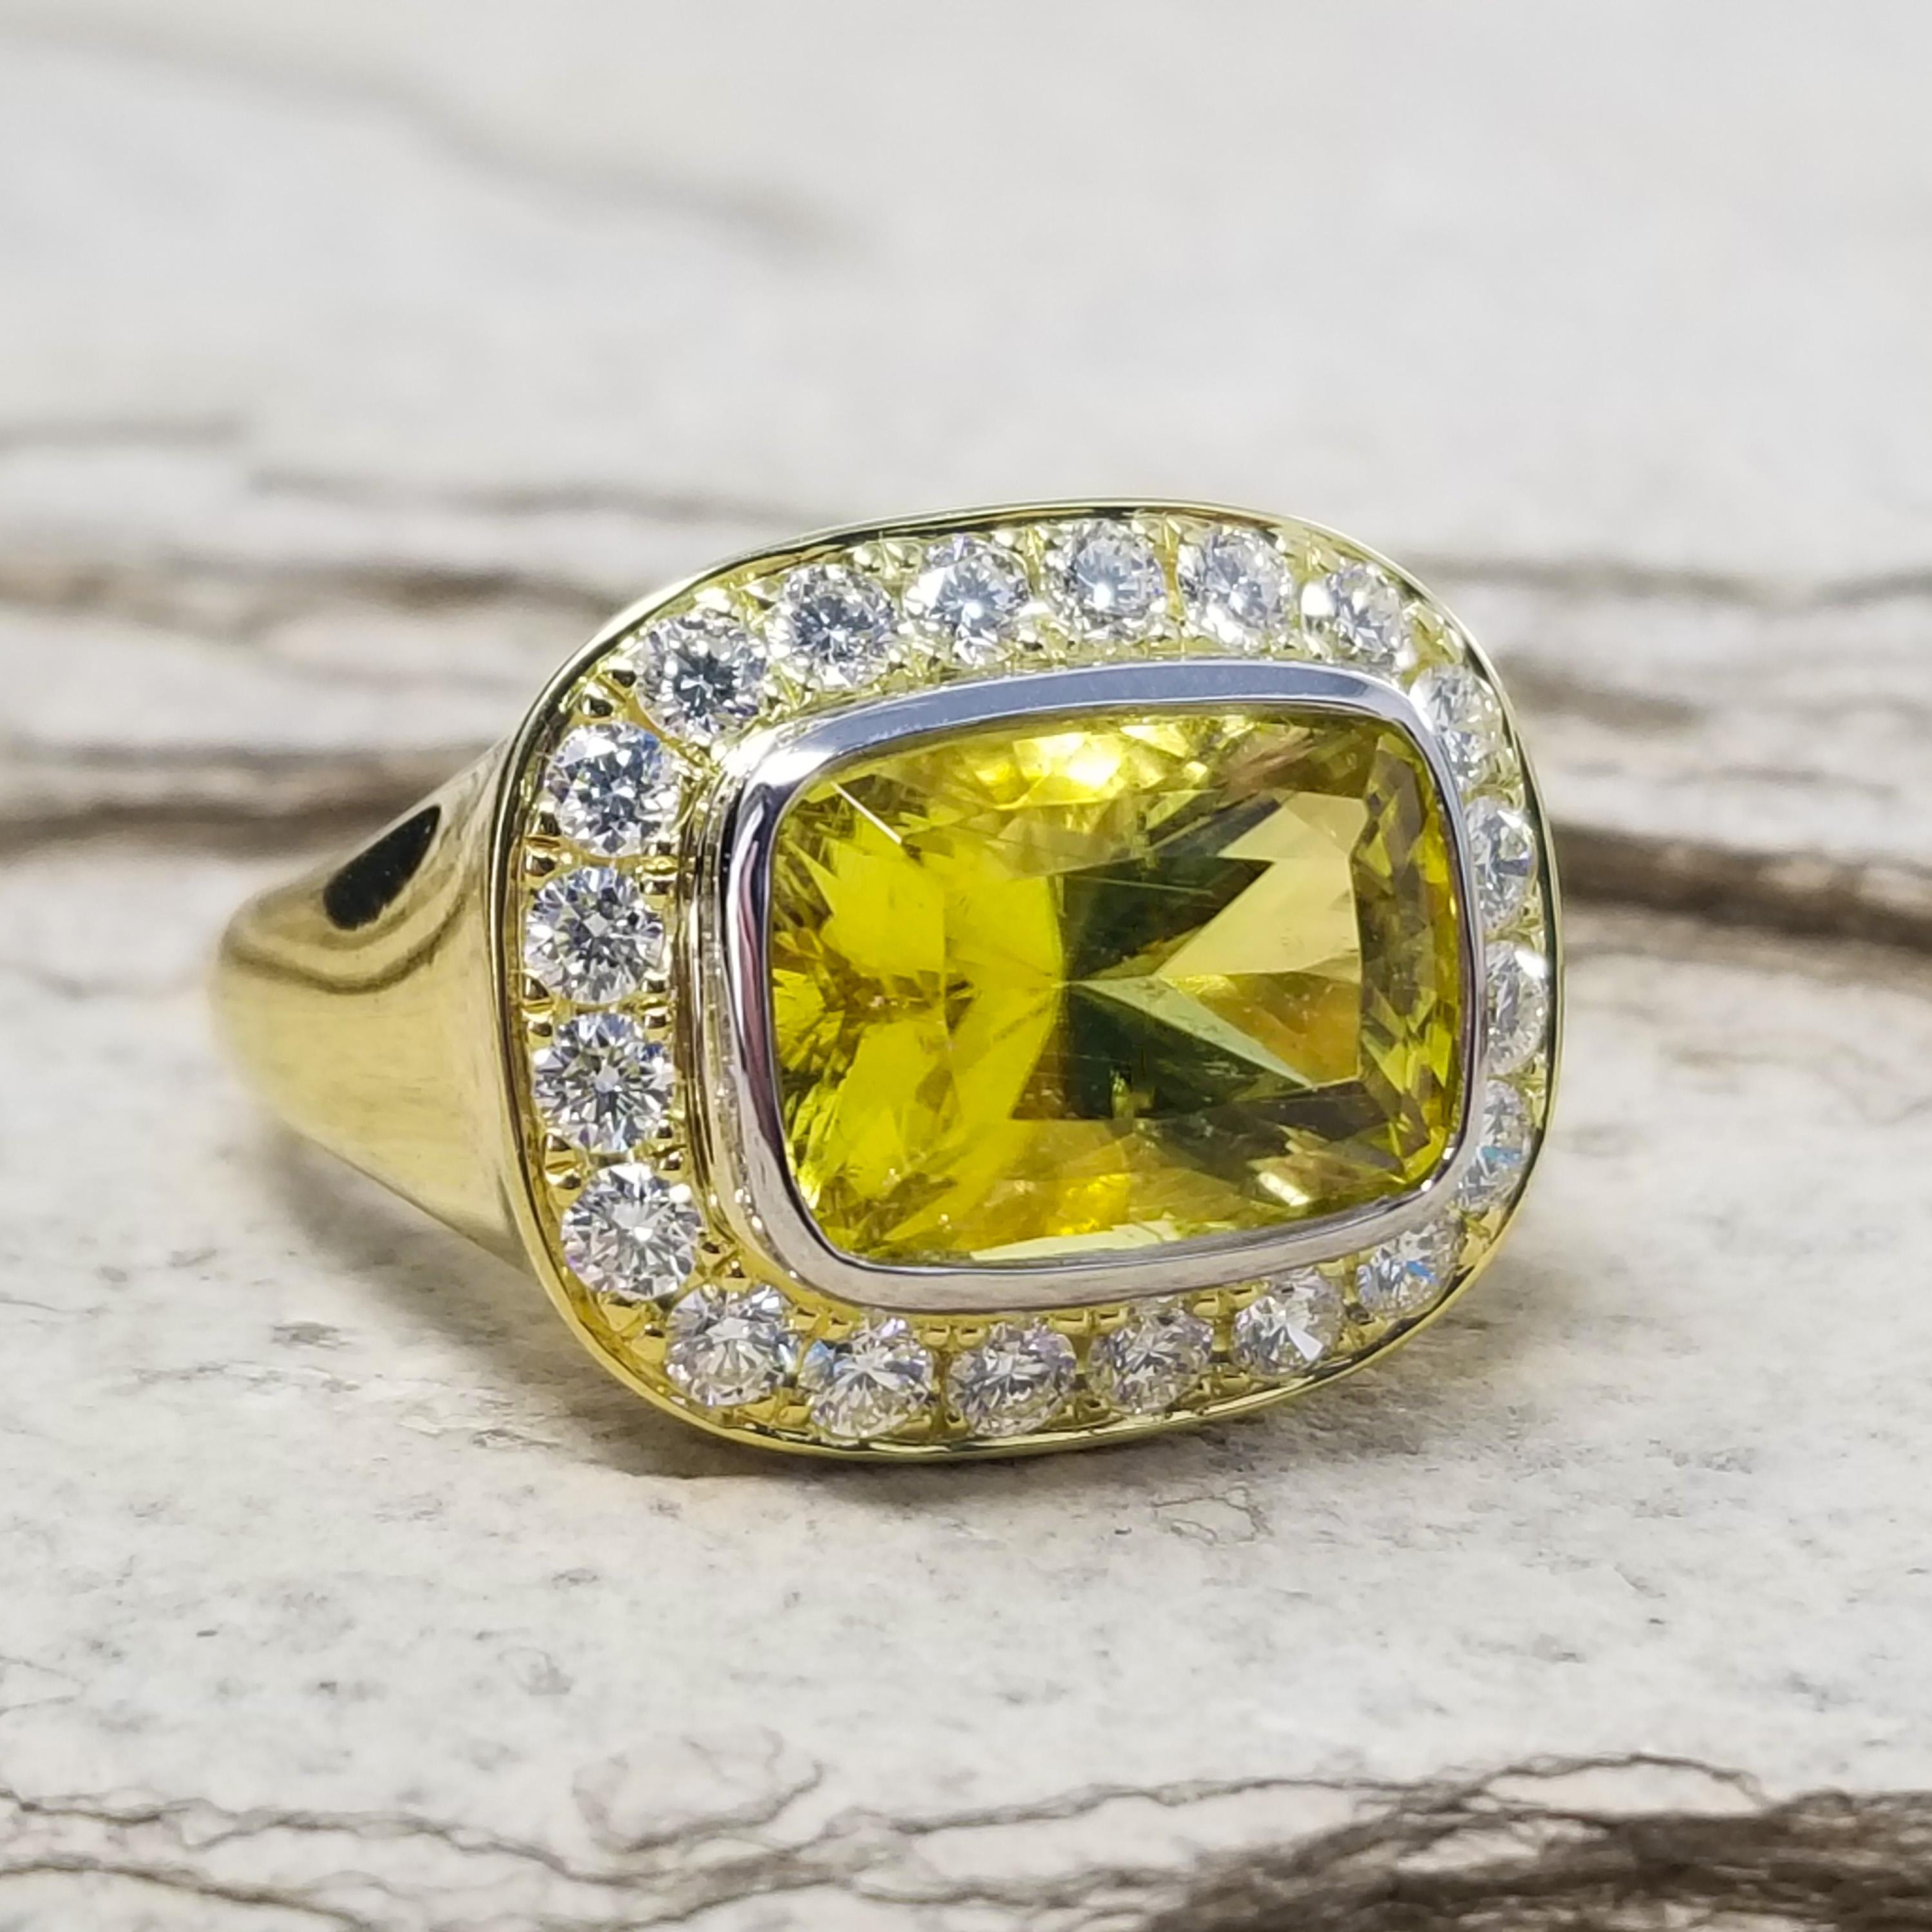 A rare canary tourmaline radiates with a luscious, lemony yellow color. Precision cut for exquisite symmetry and brilliance, this gemstone is pure, sunny joy.

The bold 